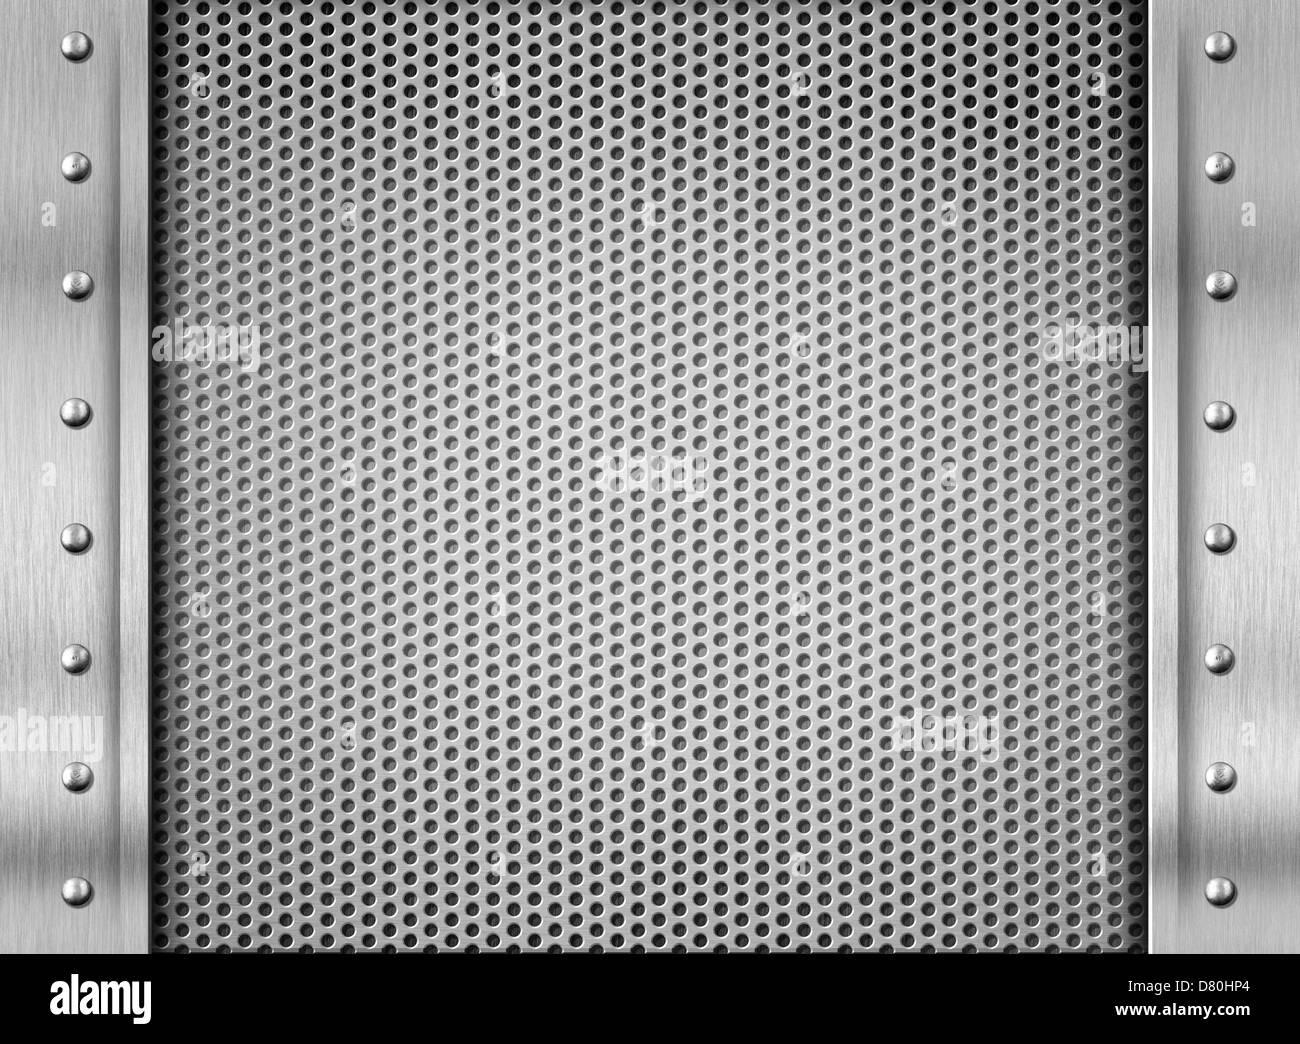 metal texture steel plate background Stock Photo